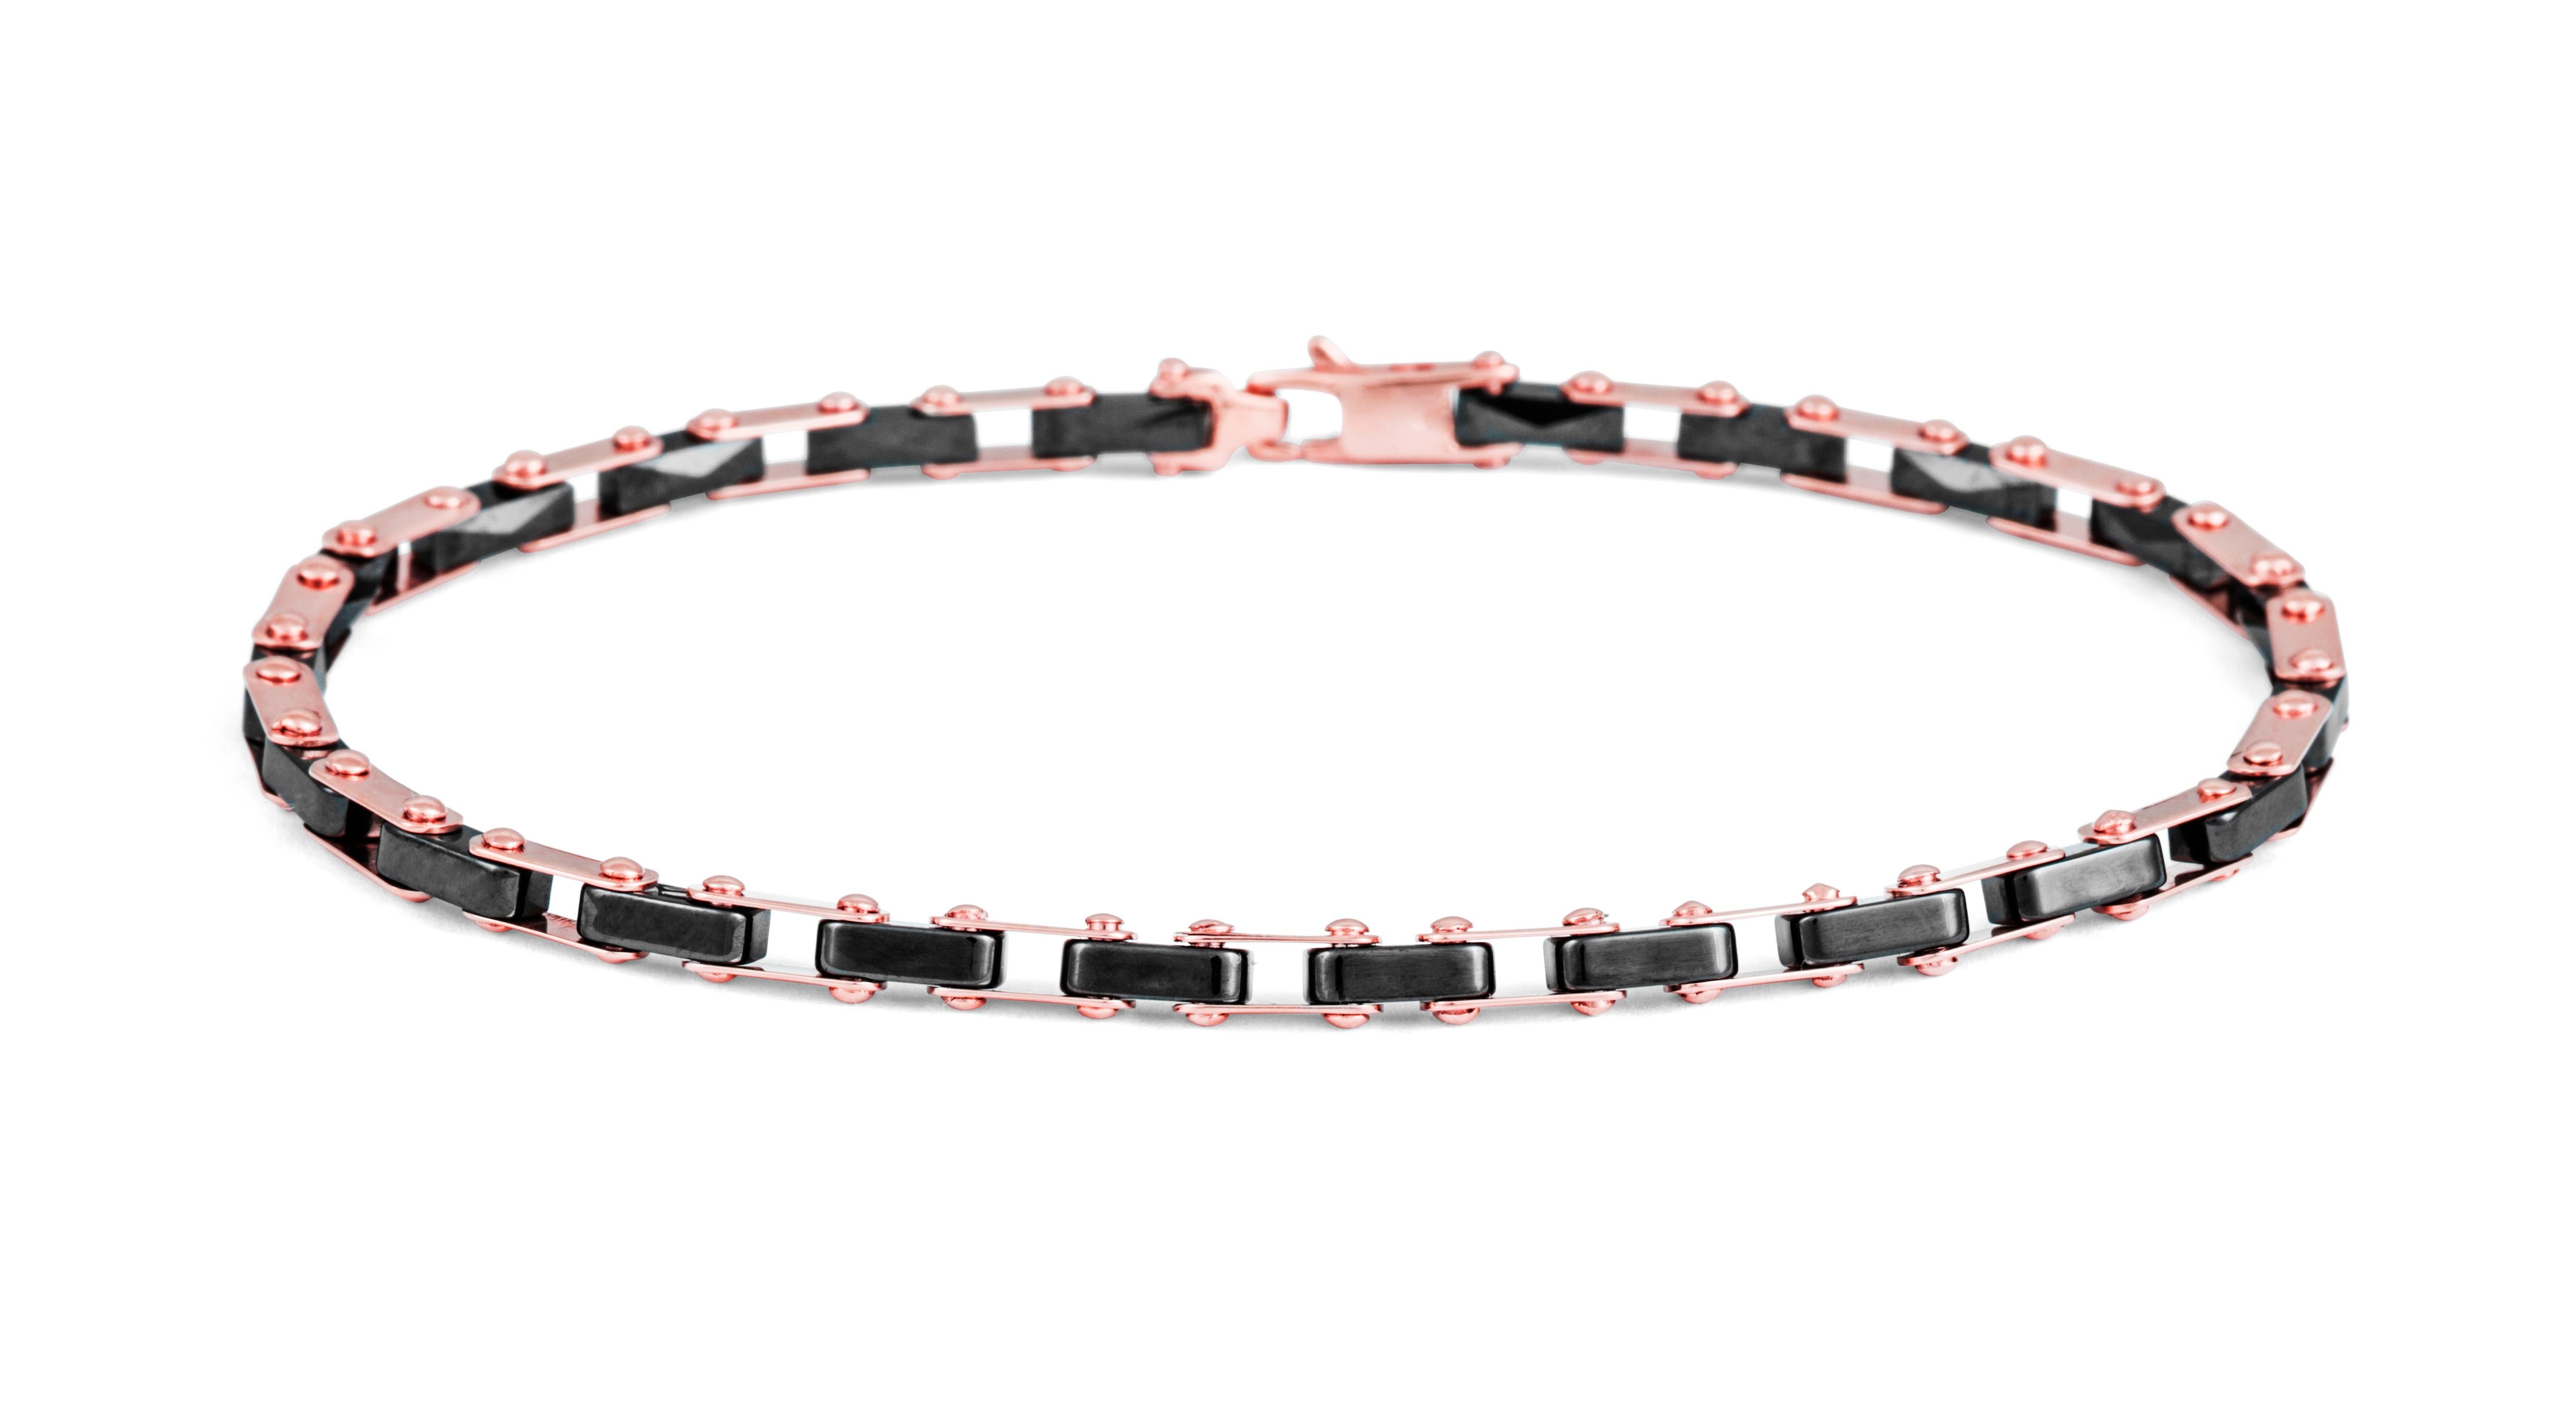 Intricately carved, black, faceted pieces of ceramic have been skillfully connected with polished 18K rose gold to create an articulating tennis style bracelet. The small square lobster clasp blends in with the links to create a flowing and stylish